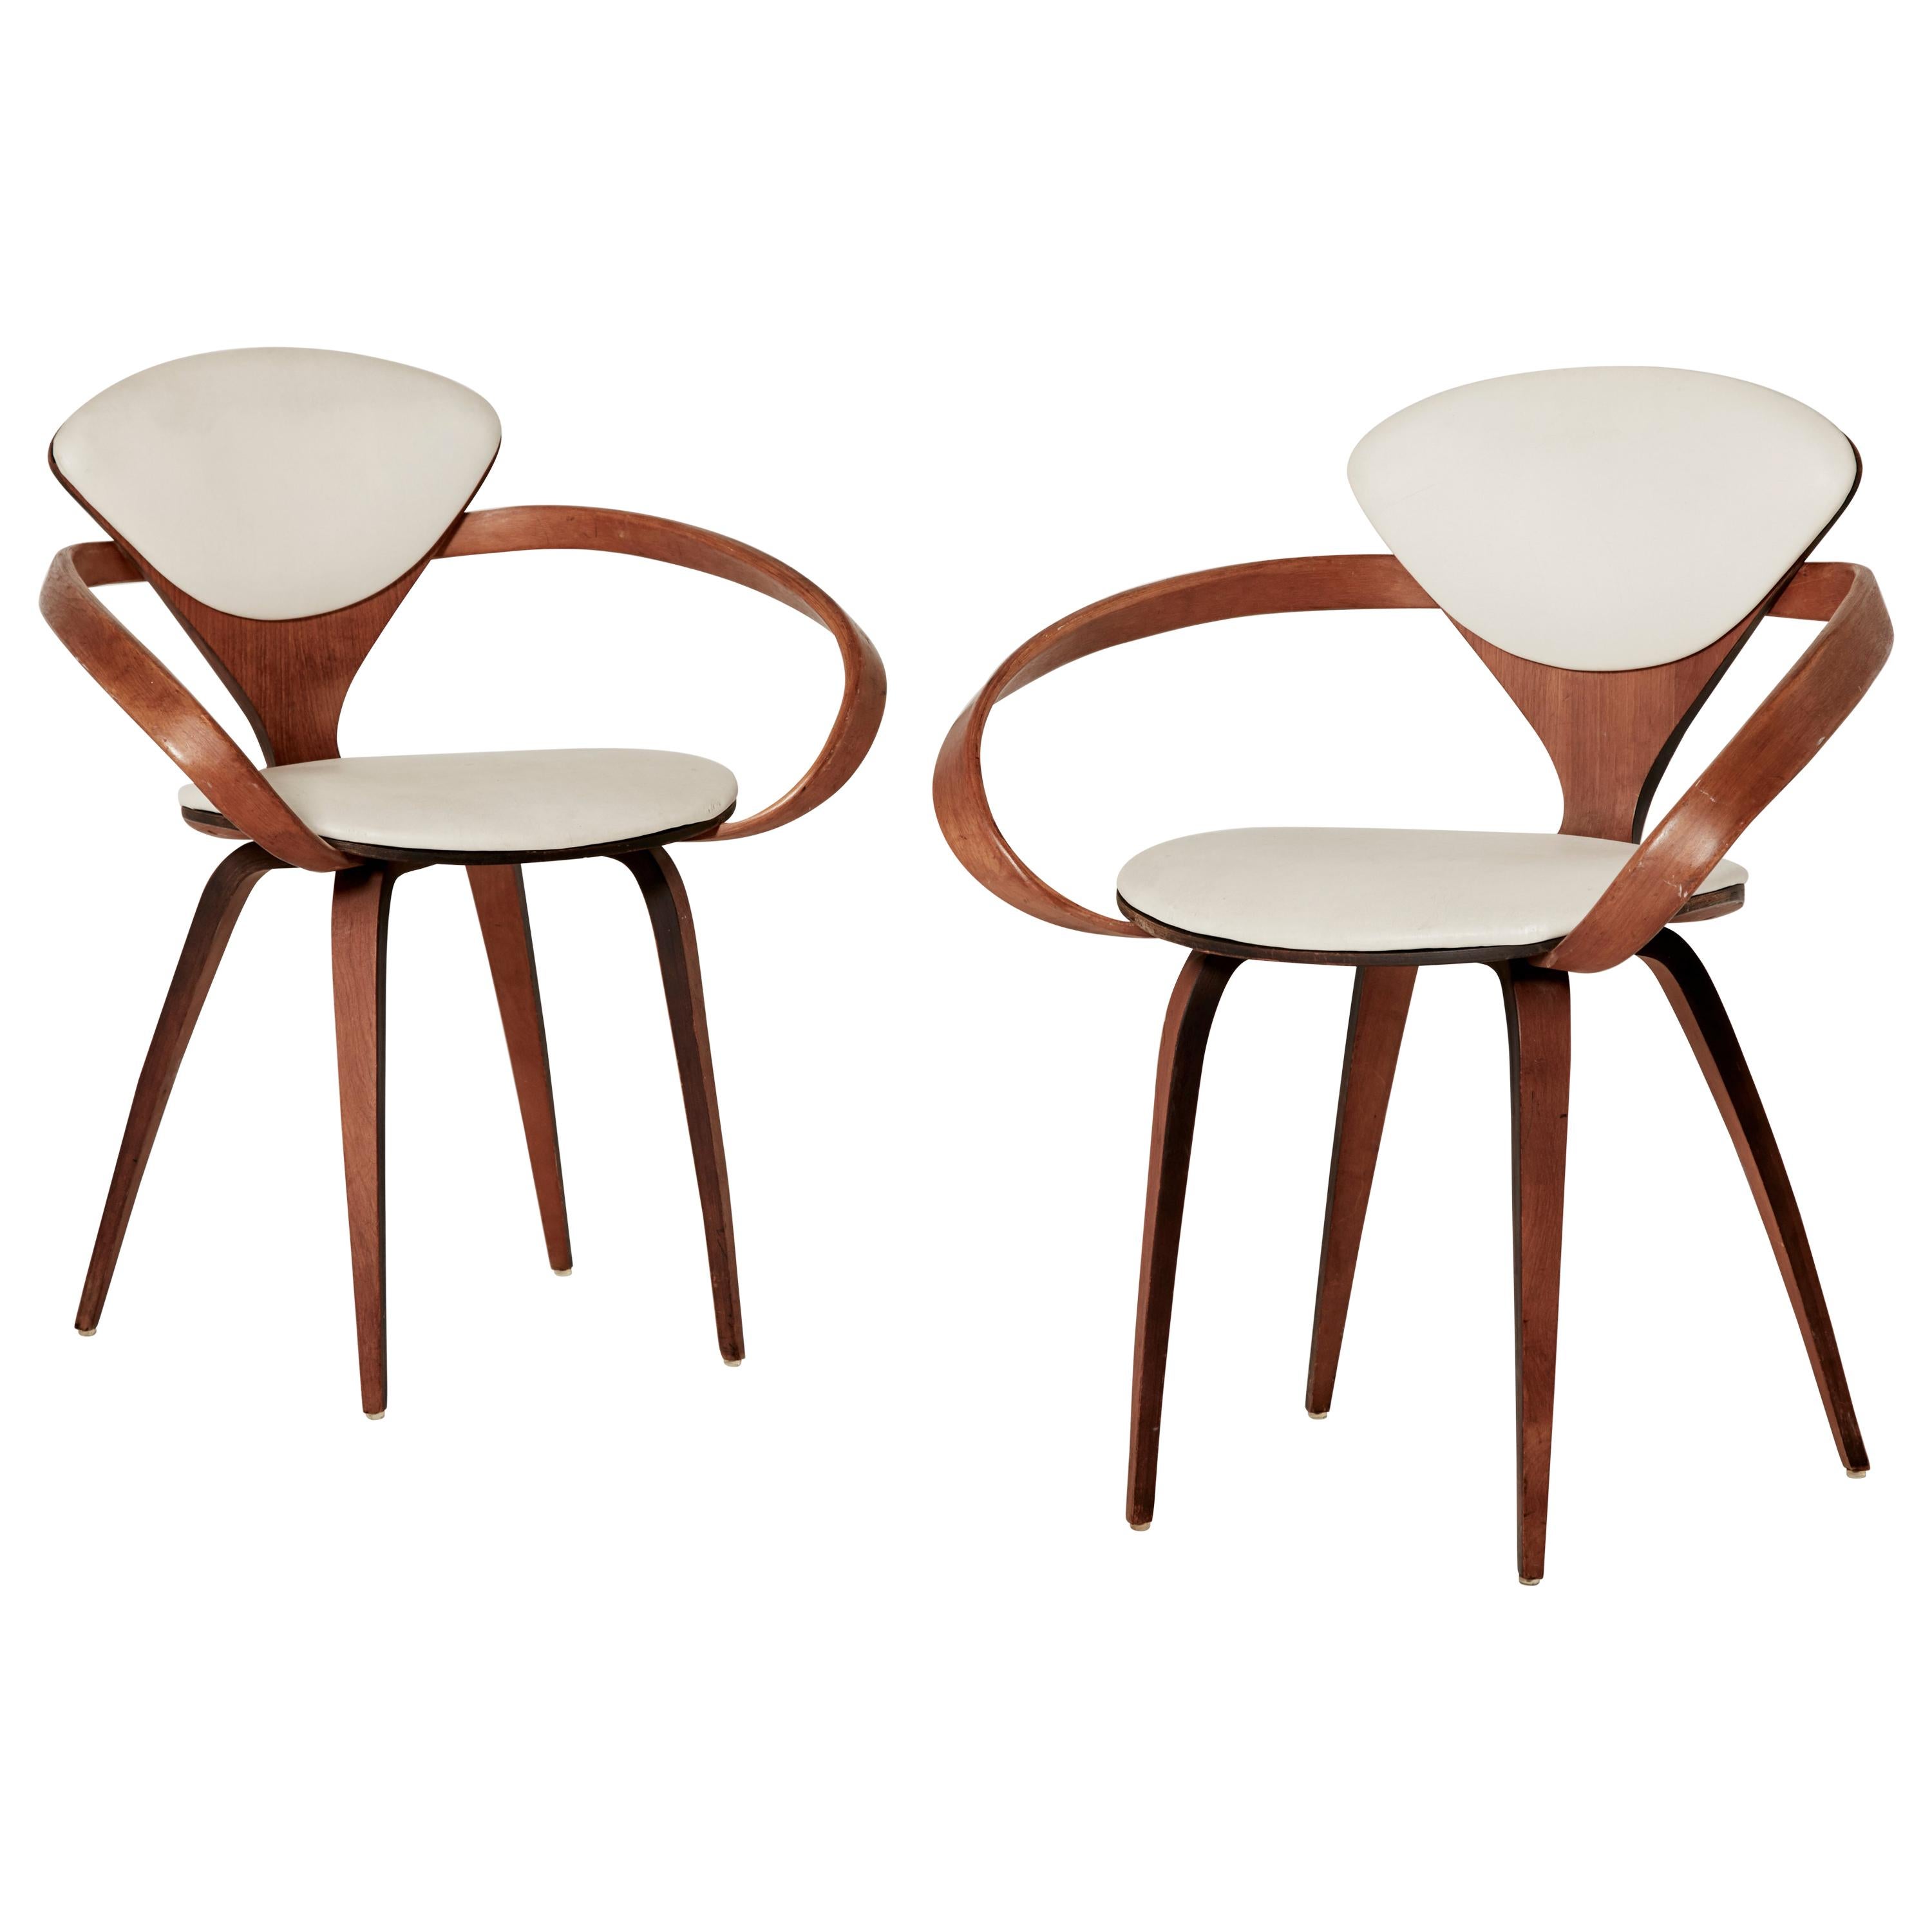 Norman Cherner Pretzel Dining Chairs, Made by Plycraft, USA, 1960s